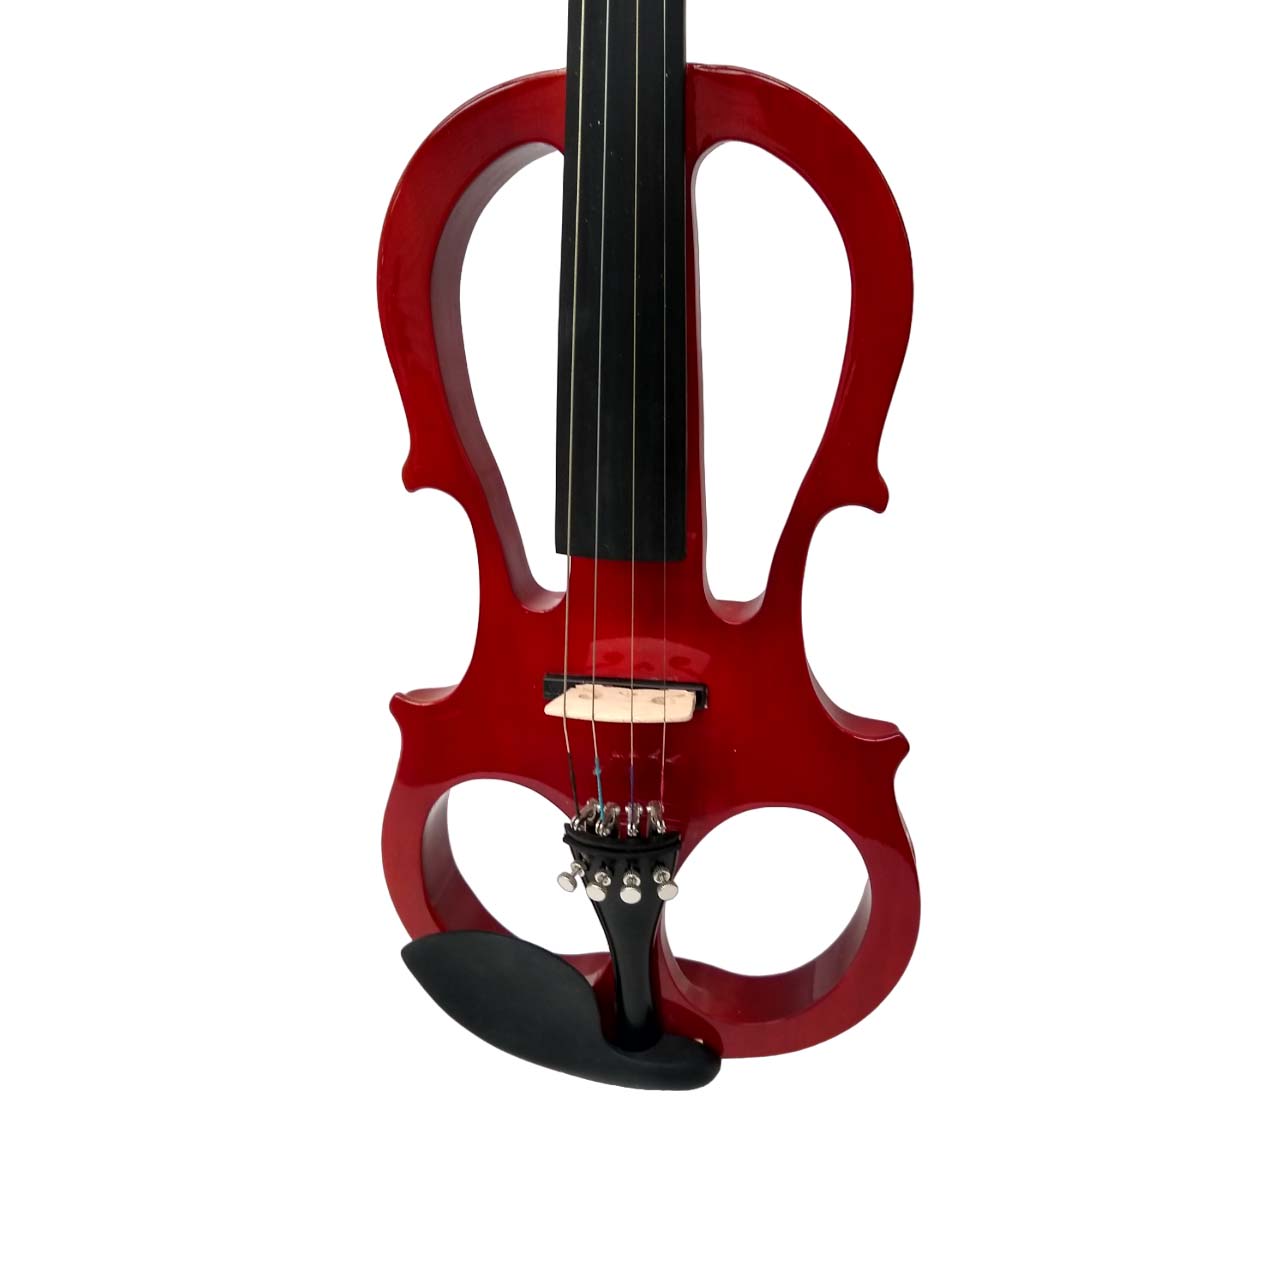 Electra Violin Shaped Speedway - Red